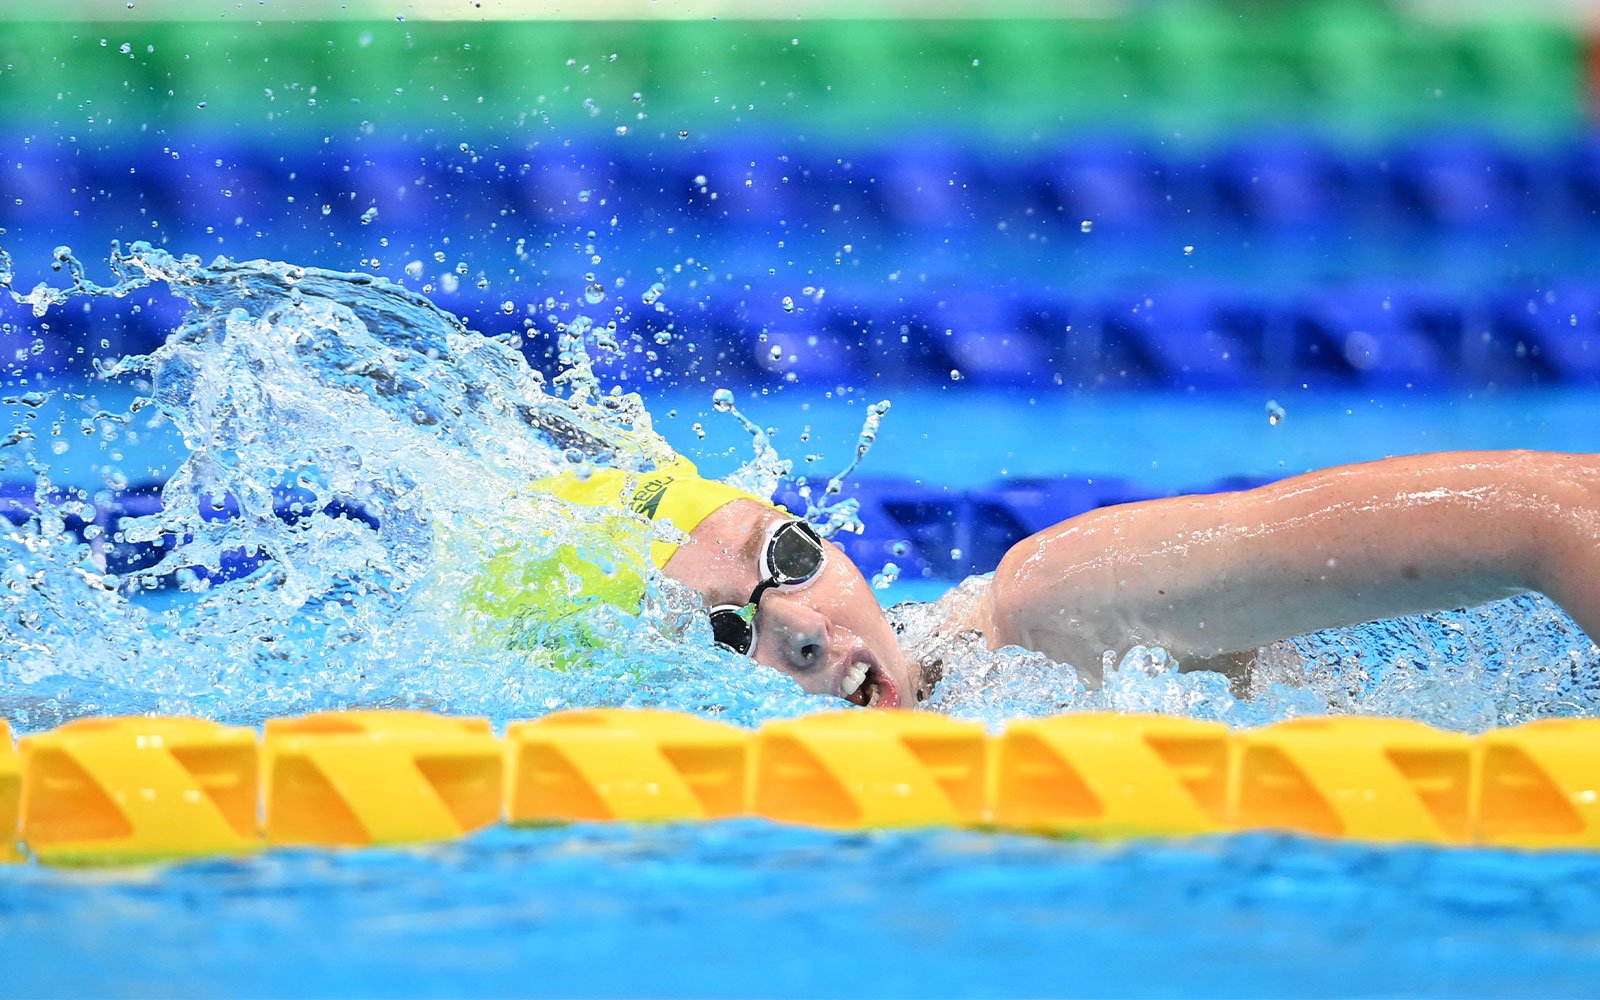 Australian Paralympian Lakeisha Patterson swimming. She is wearing goggles and a swimming cap.